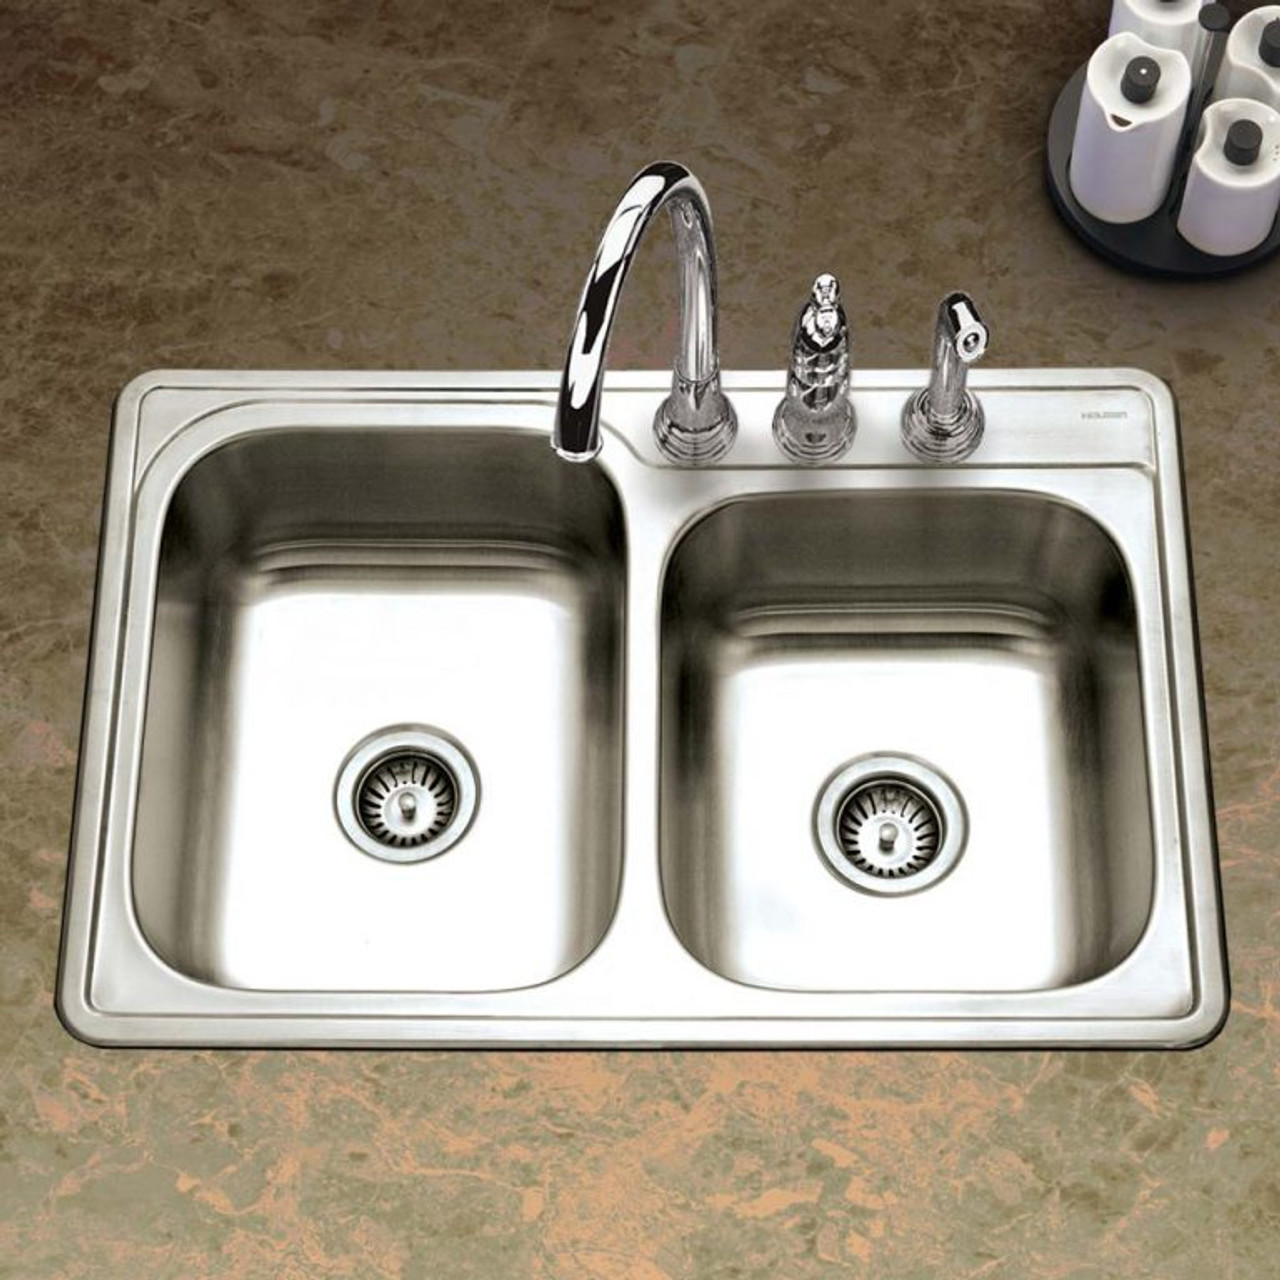 Double Sink Cover Plastic Cutting Board Faucet Mounted